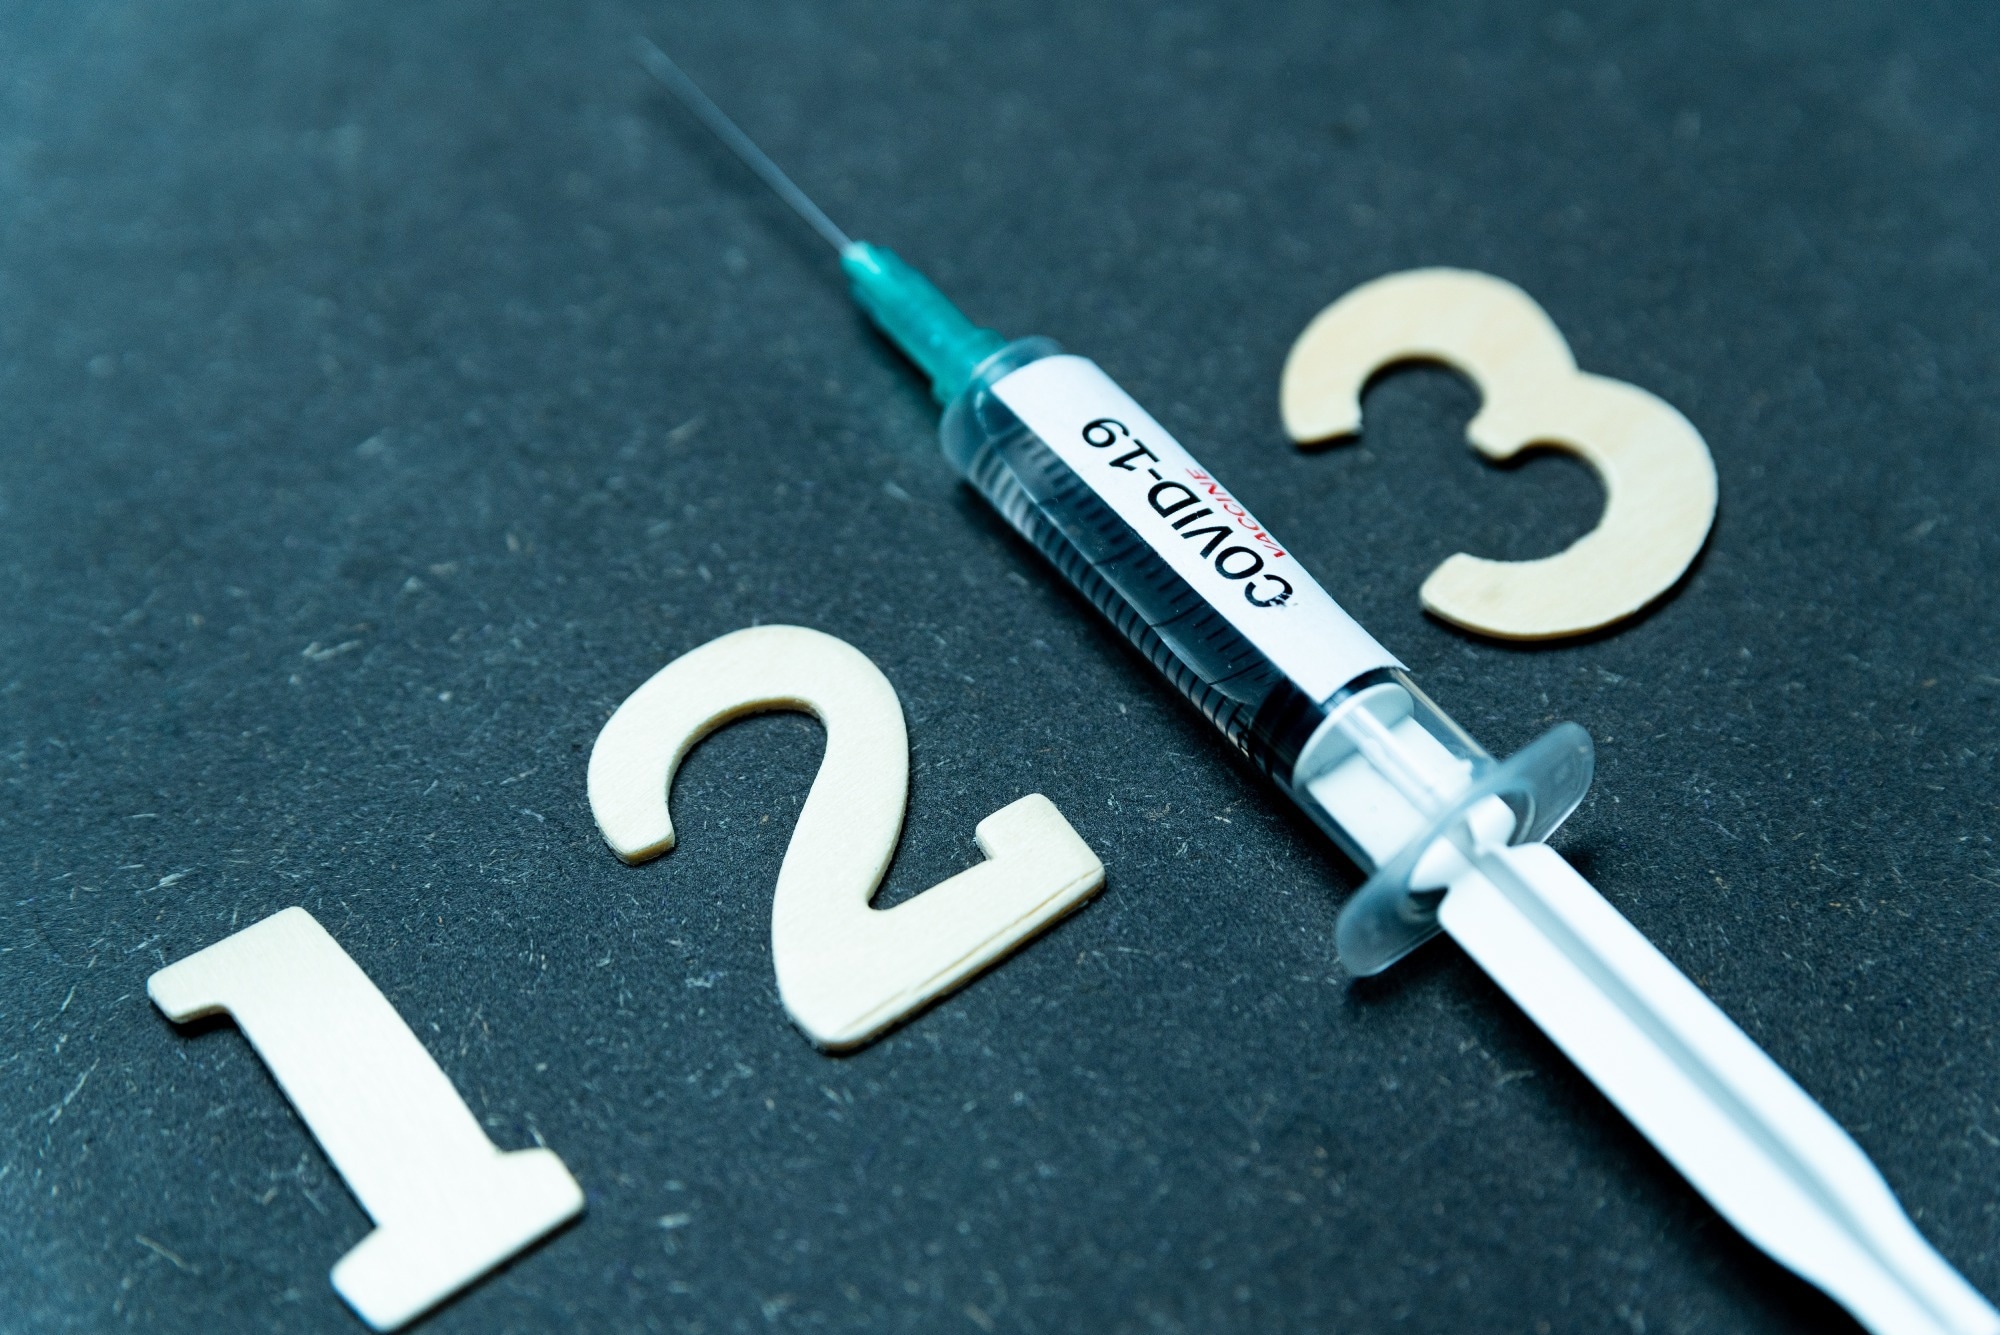 Study: Vaccine effectiveness of primary and booster COVID-19 vaccinations against SARS-CoV-2 infection in the Netherlands from 12 July 2021 to 6 June 2022: a prospective cohort study. Image Credit: Davide Bonaldo / Shutterstock